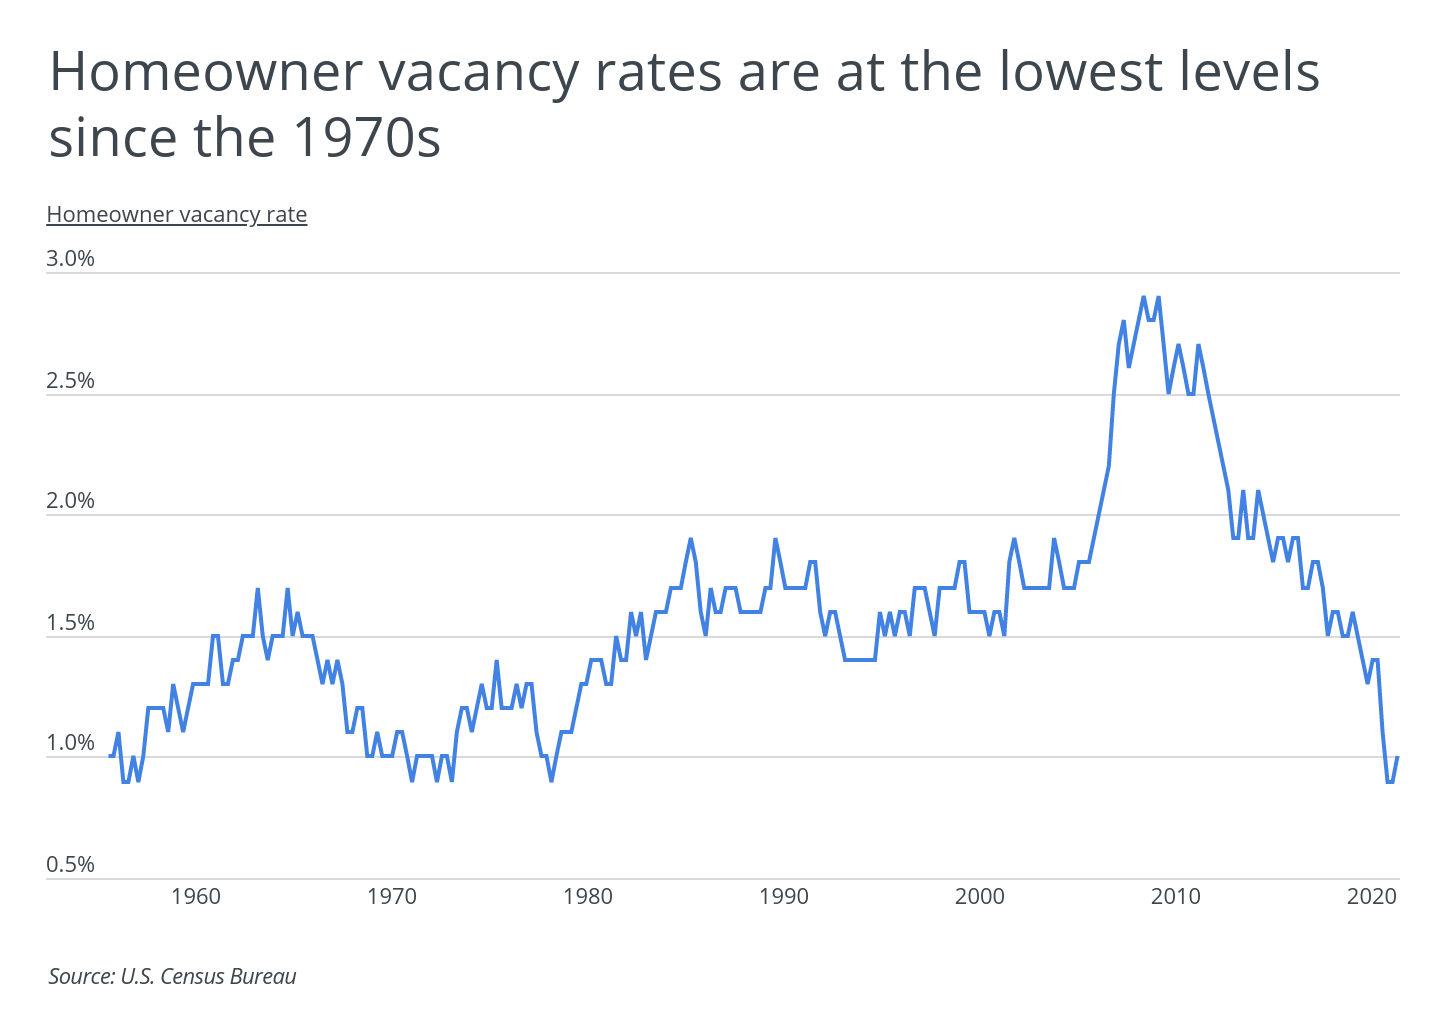 Homeowner vacancy rates are at the lowest levels since the 1970